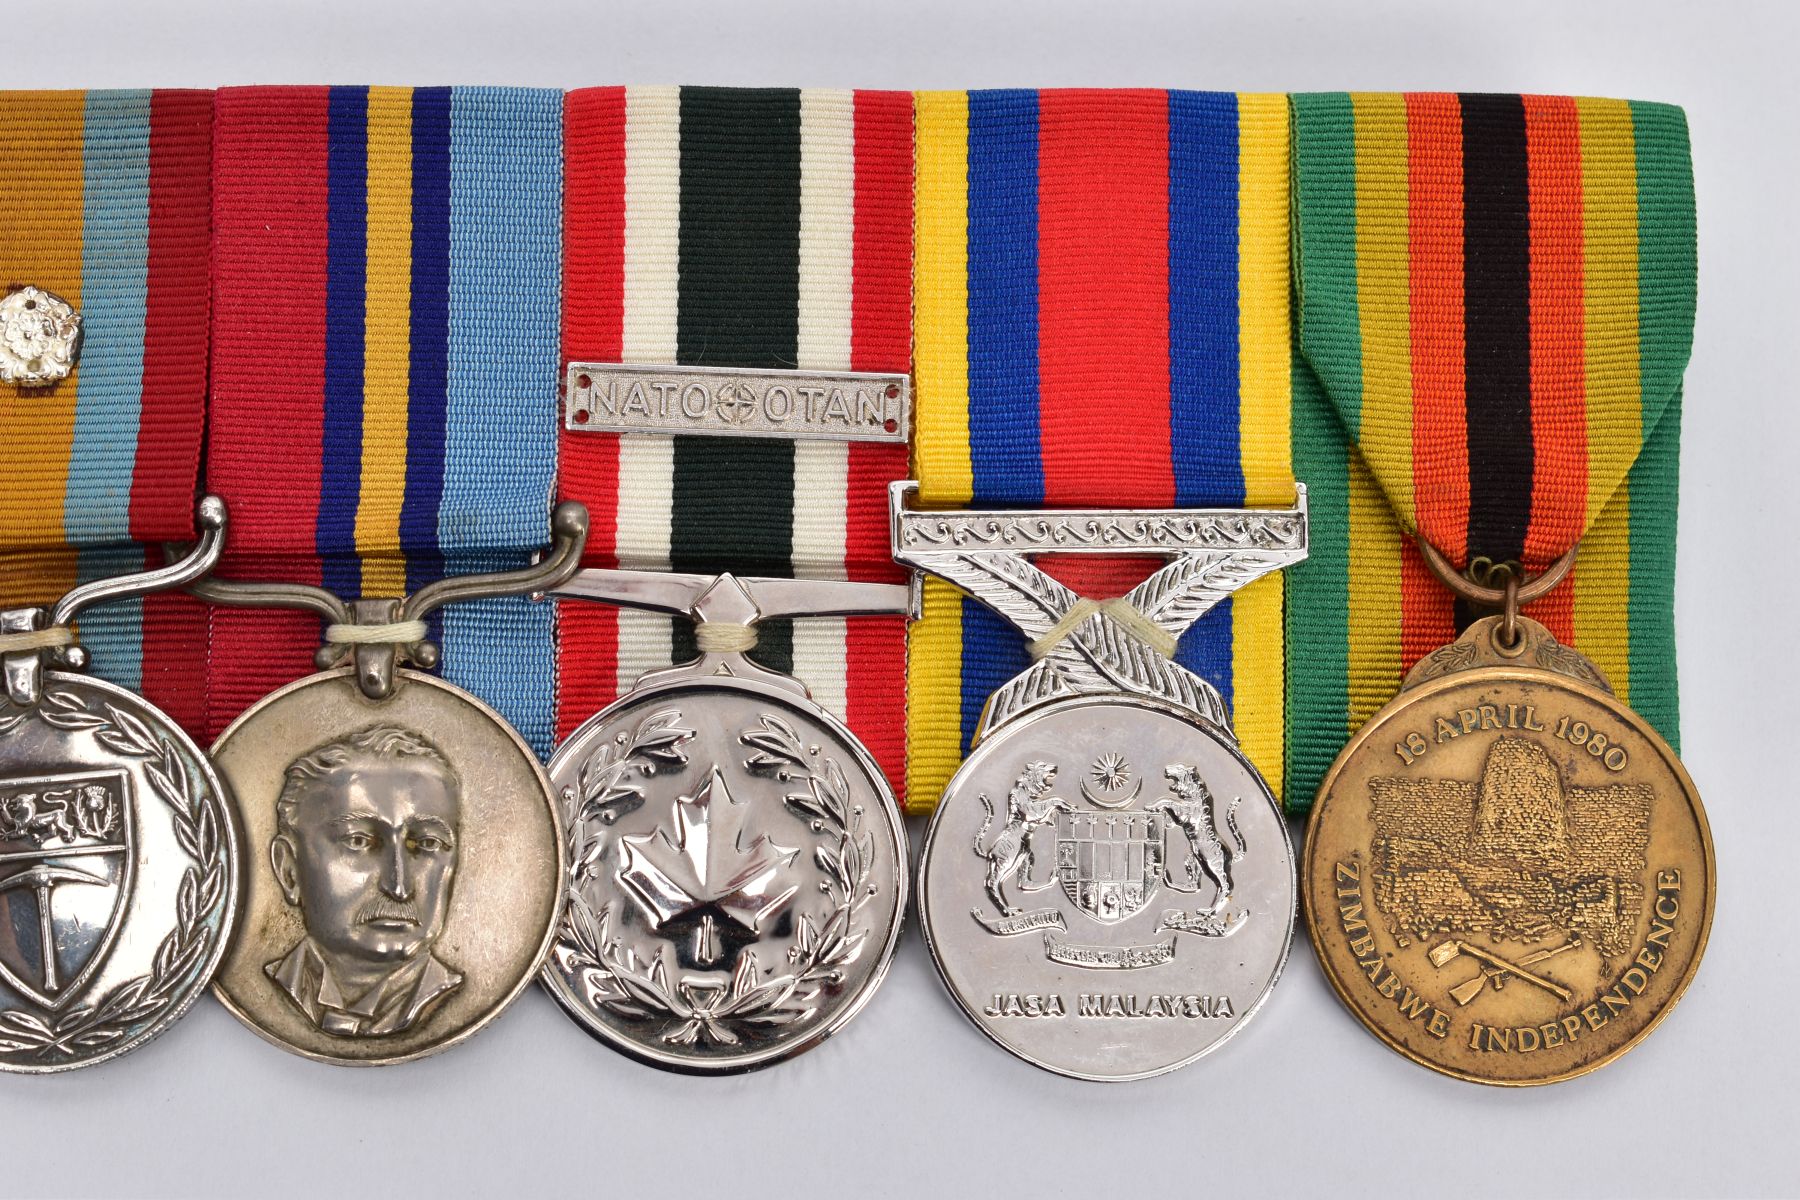 A UNIQUE GROUP OF SIX MEDALS to Roger Brian Carden TATTERSALL, born 30th June 1938, a member of - Image 18 of 37